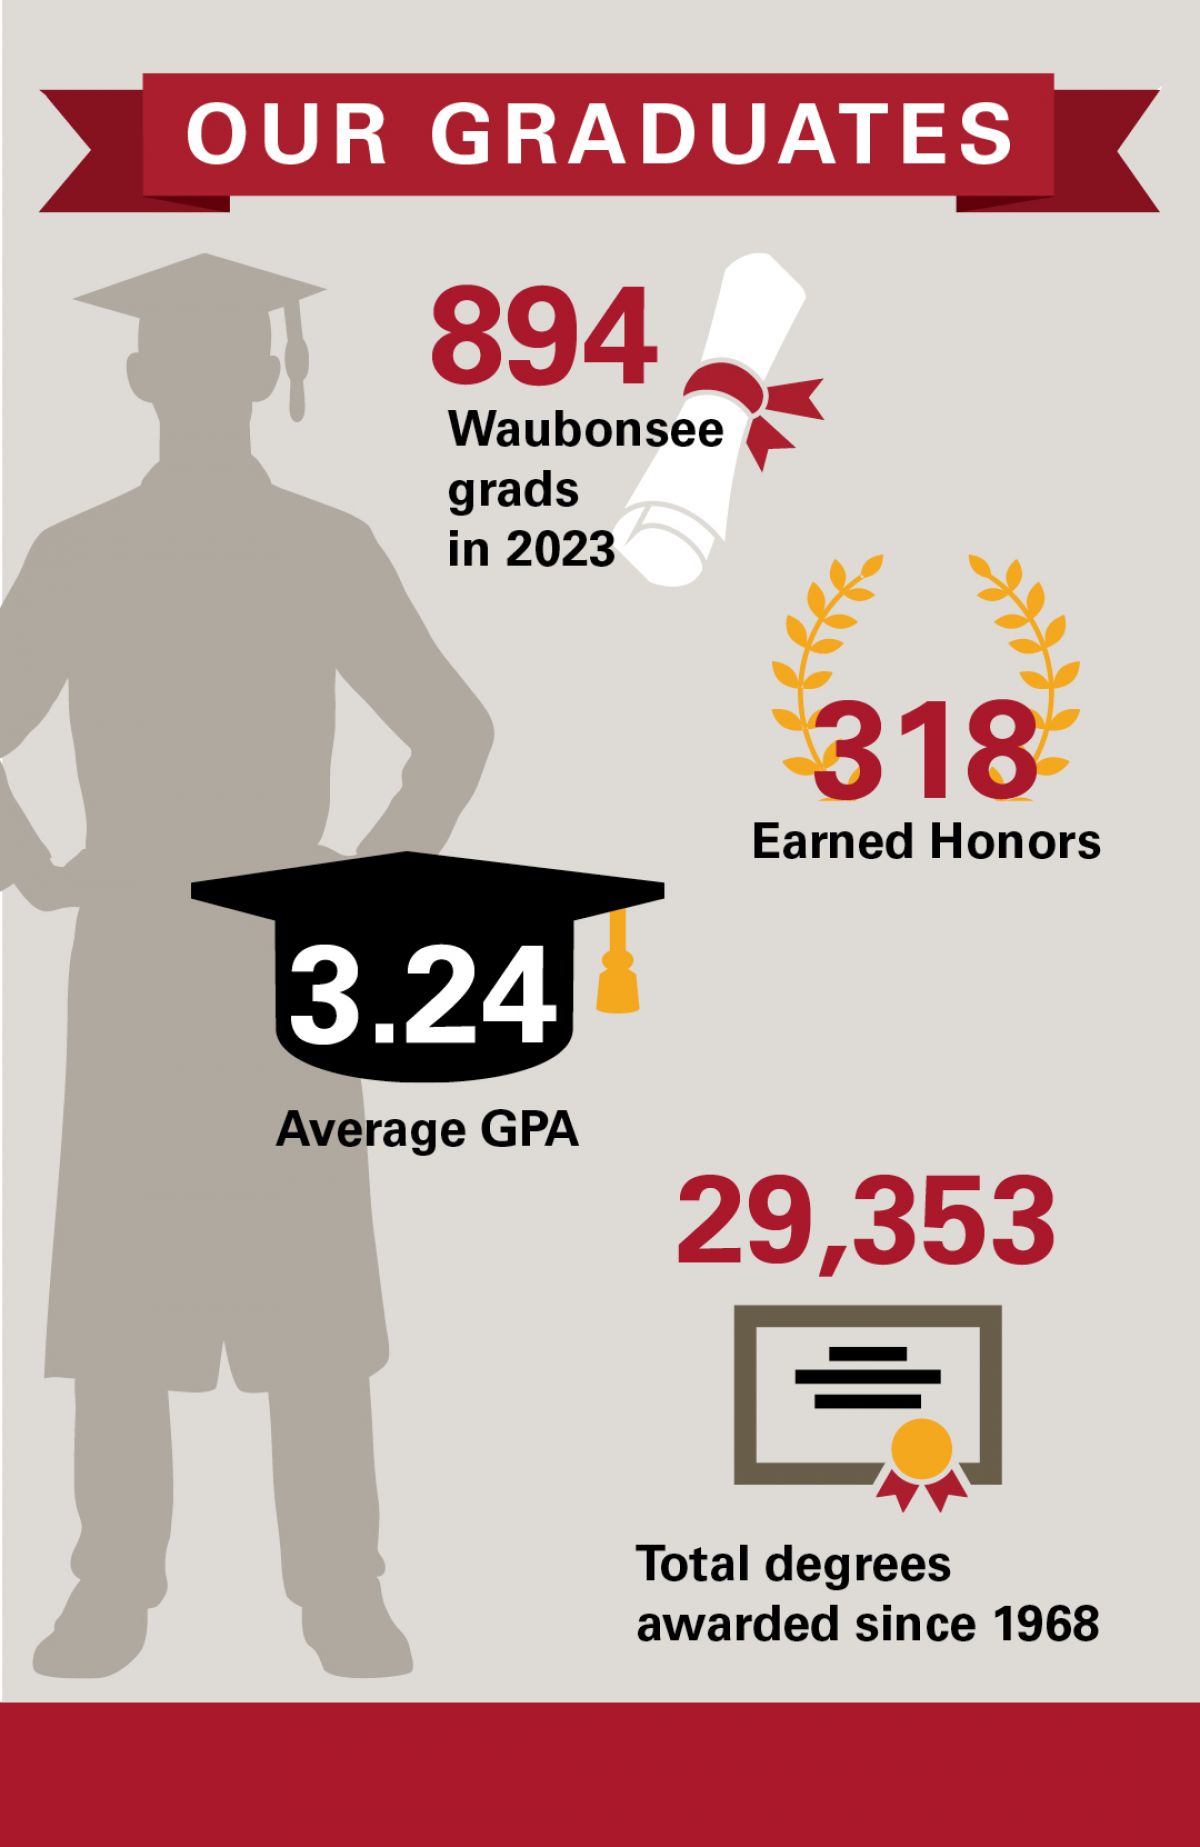 2023 Graduation Infographic: 894 Waubonsee grads; 318 Earned Honors; 3.24 Average GPA; 29,353 Total degrees awarded since 1968